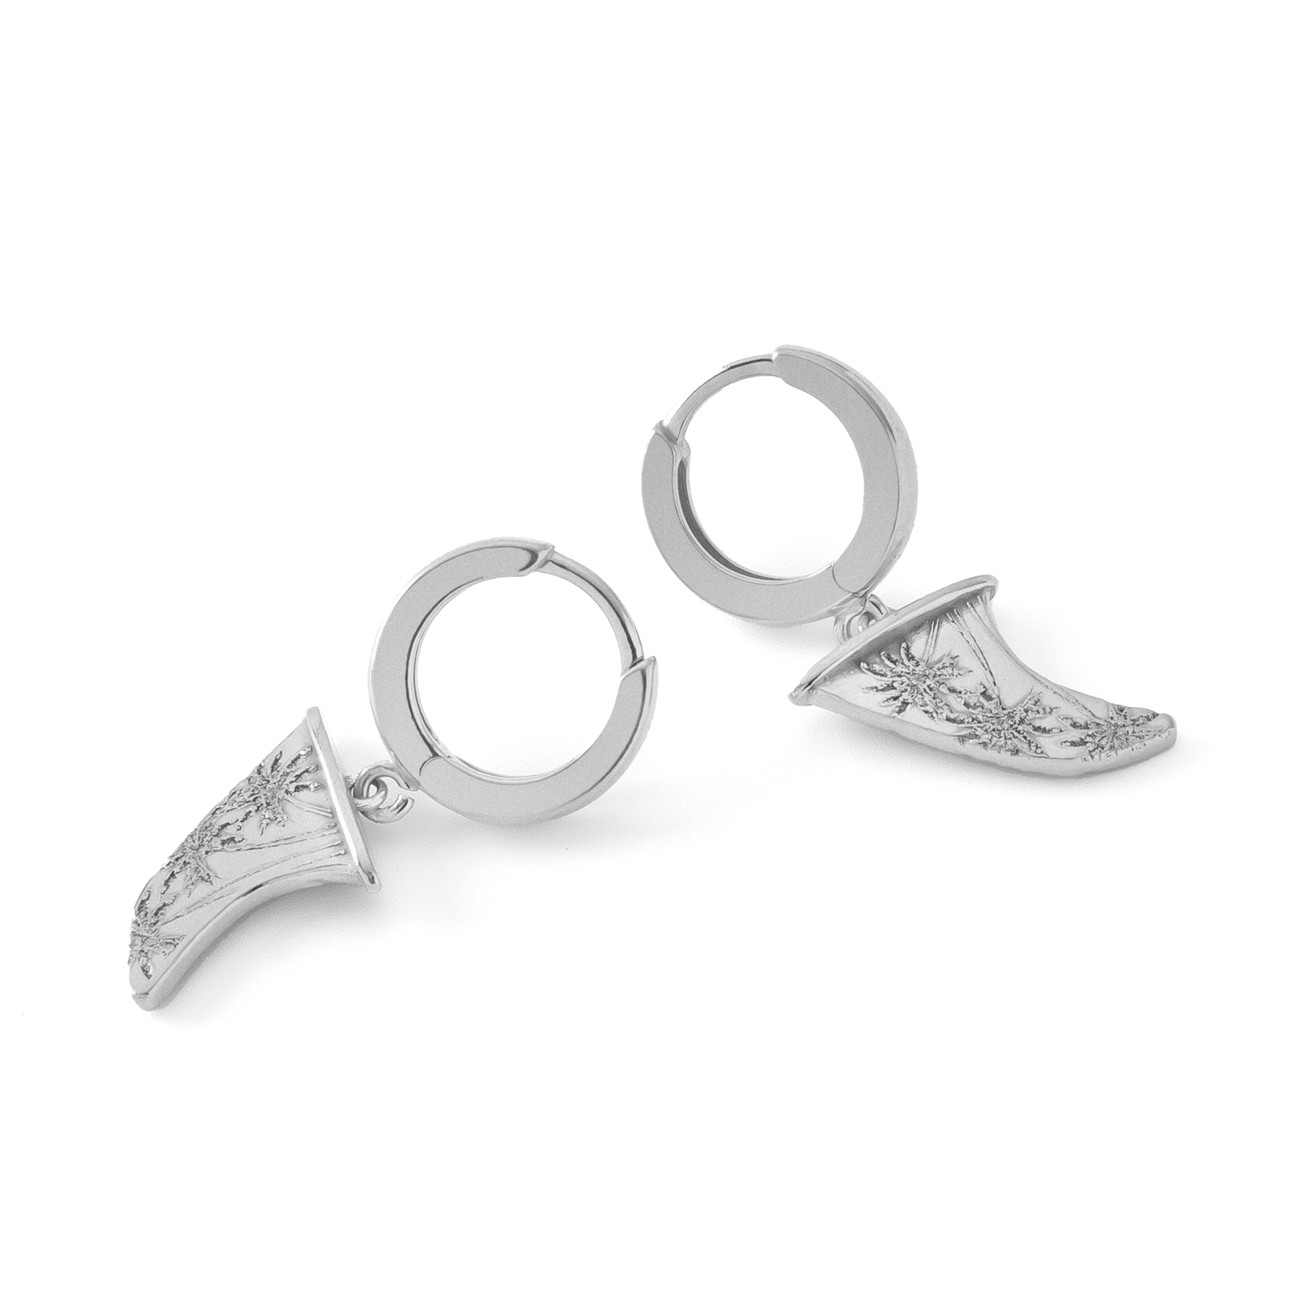 Silver earrings with a fin-shaped pendant, AUGUSTYNKA x GIORRE